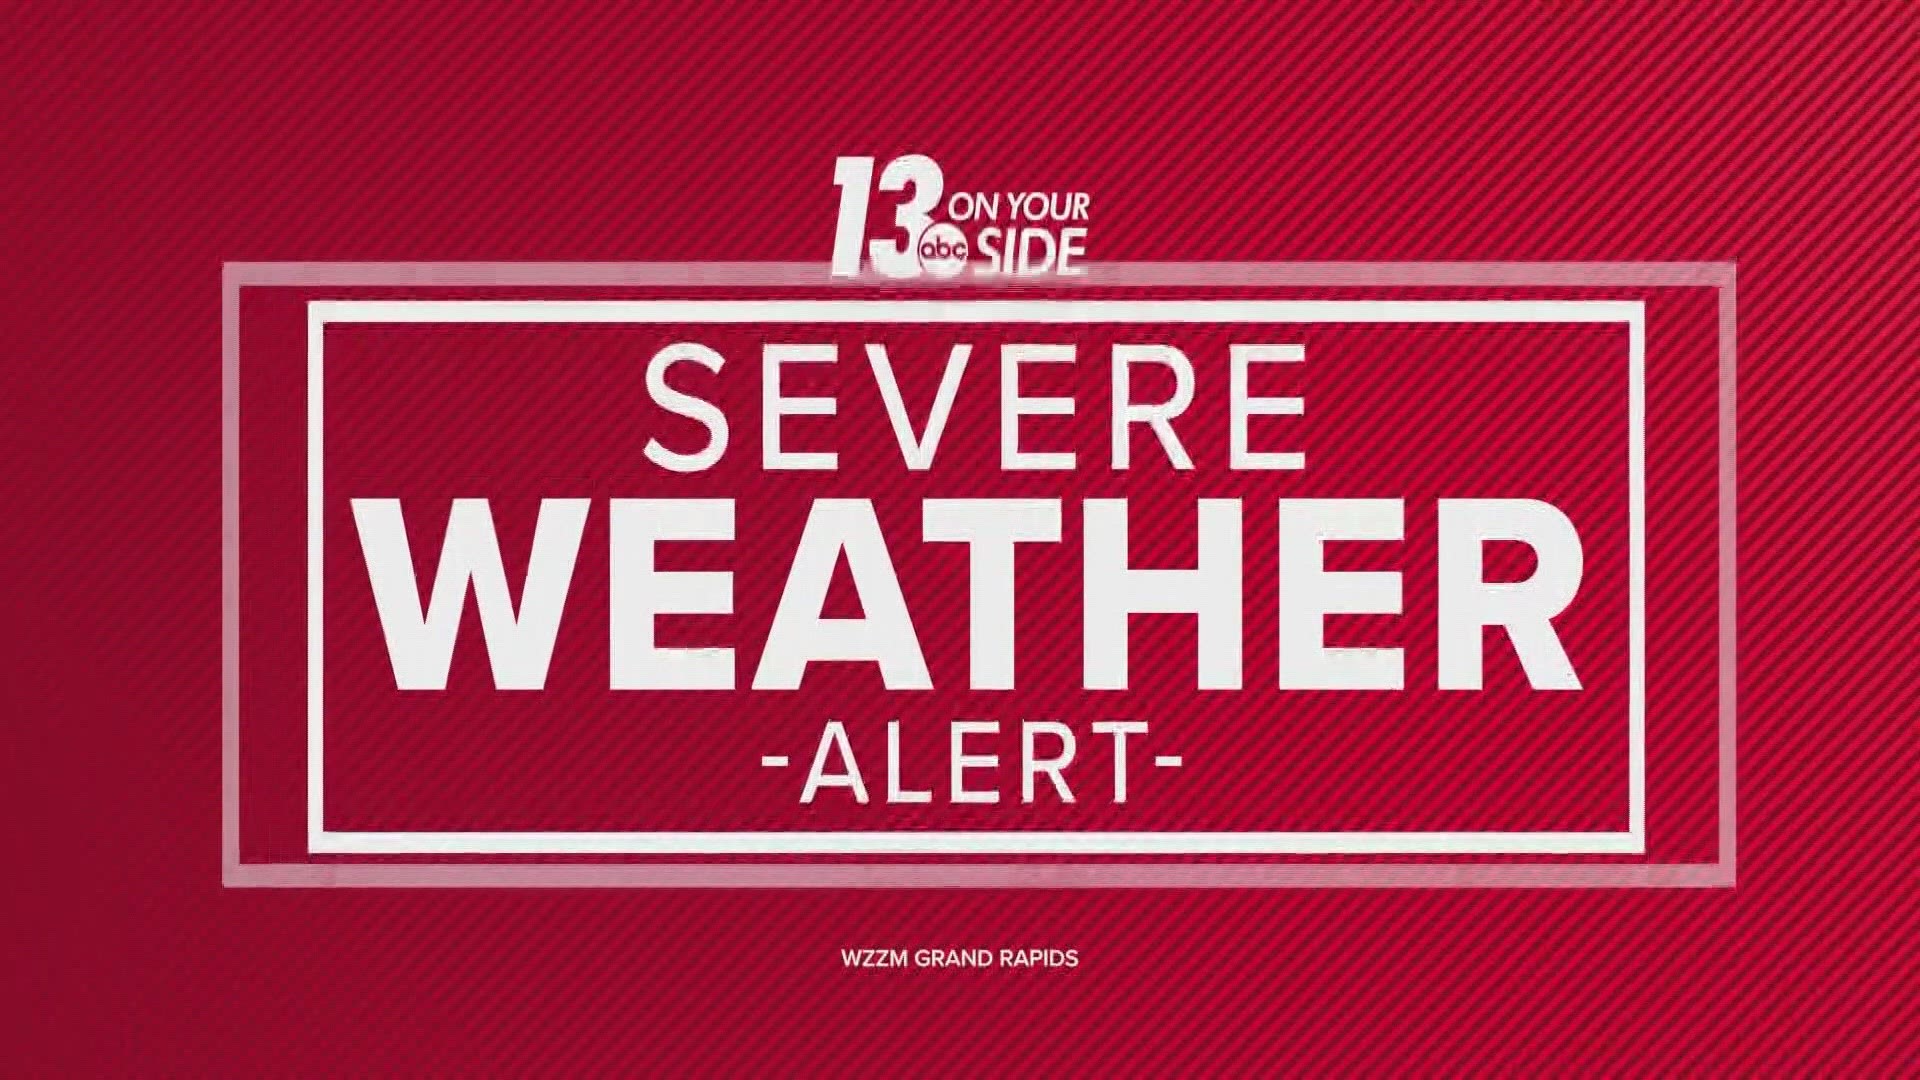 Severe thunderstorm warnings are now issued for portions of West Michigan. Meteorologist Michael Behrens has the updates.